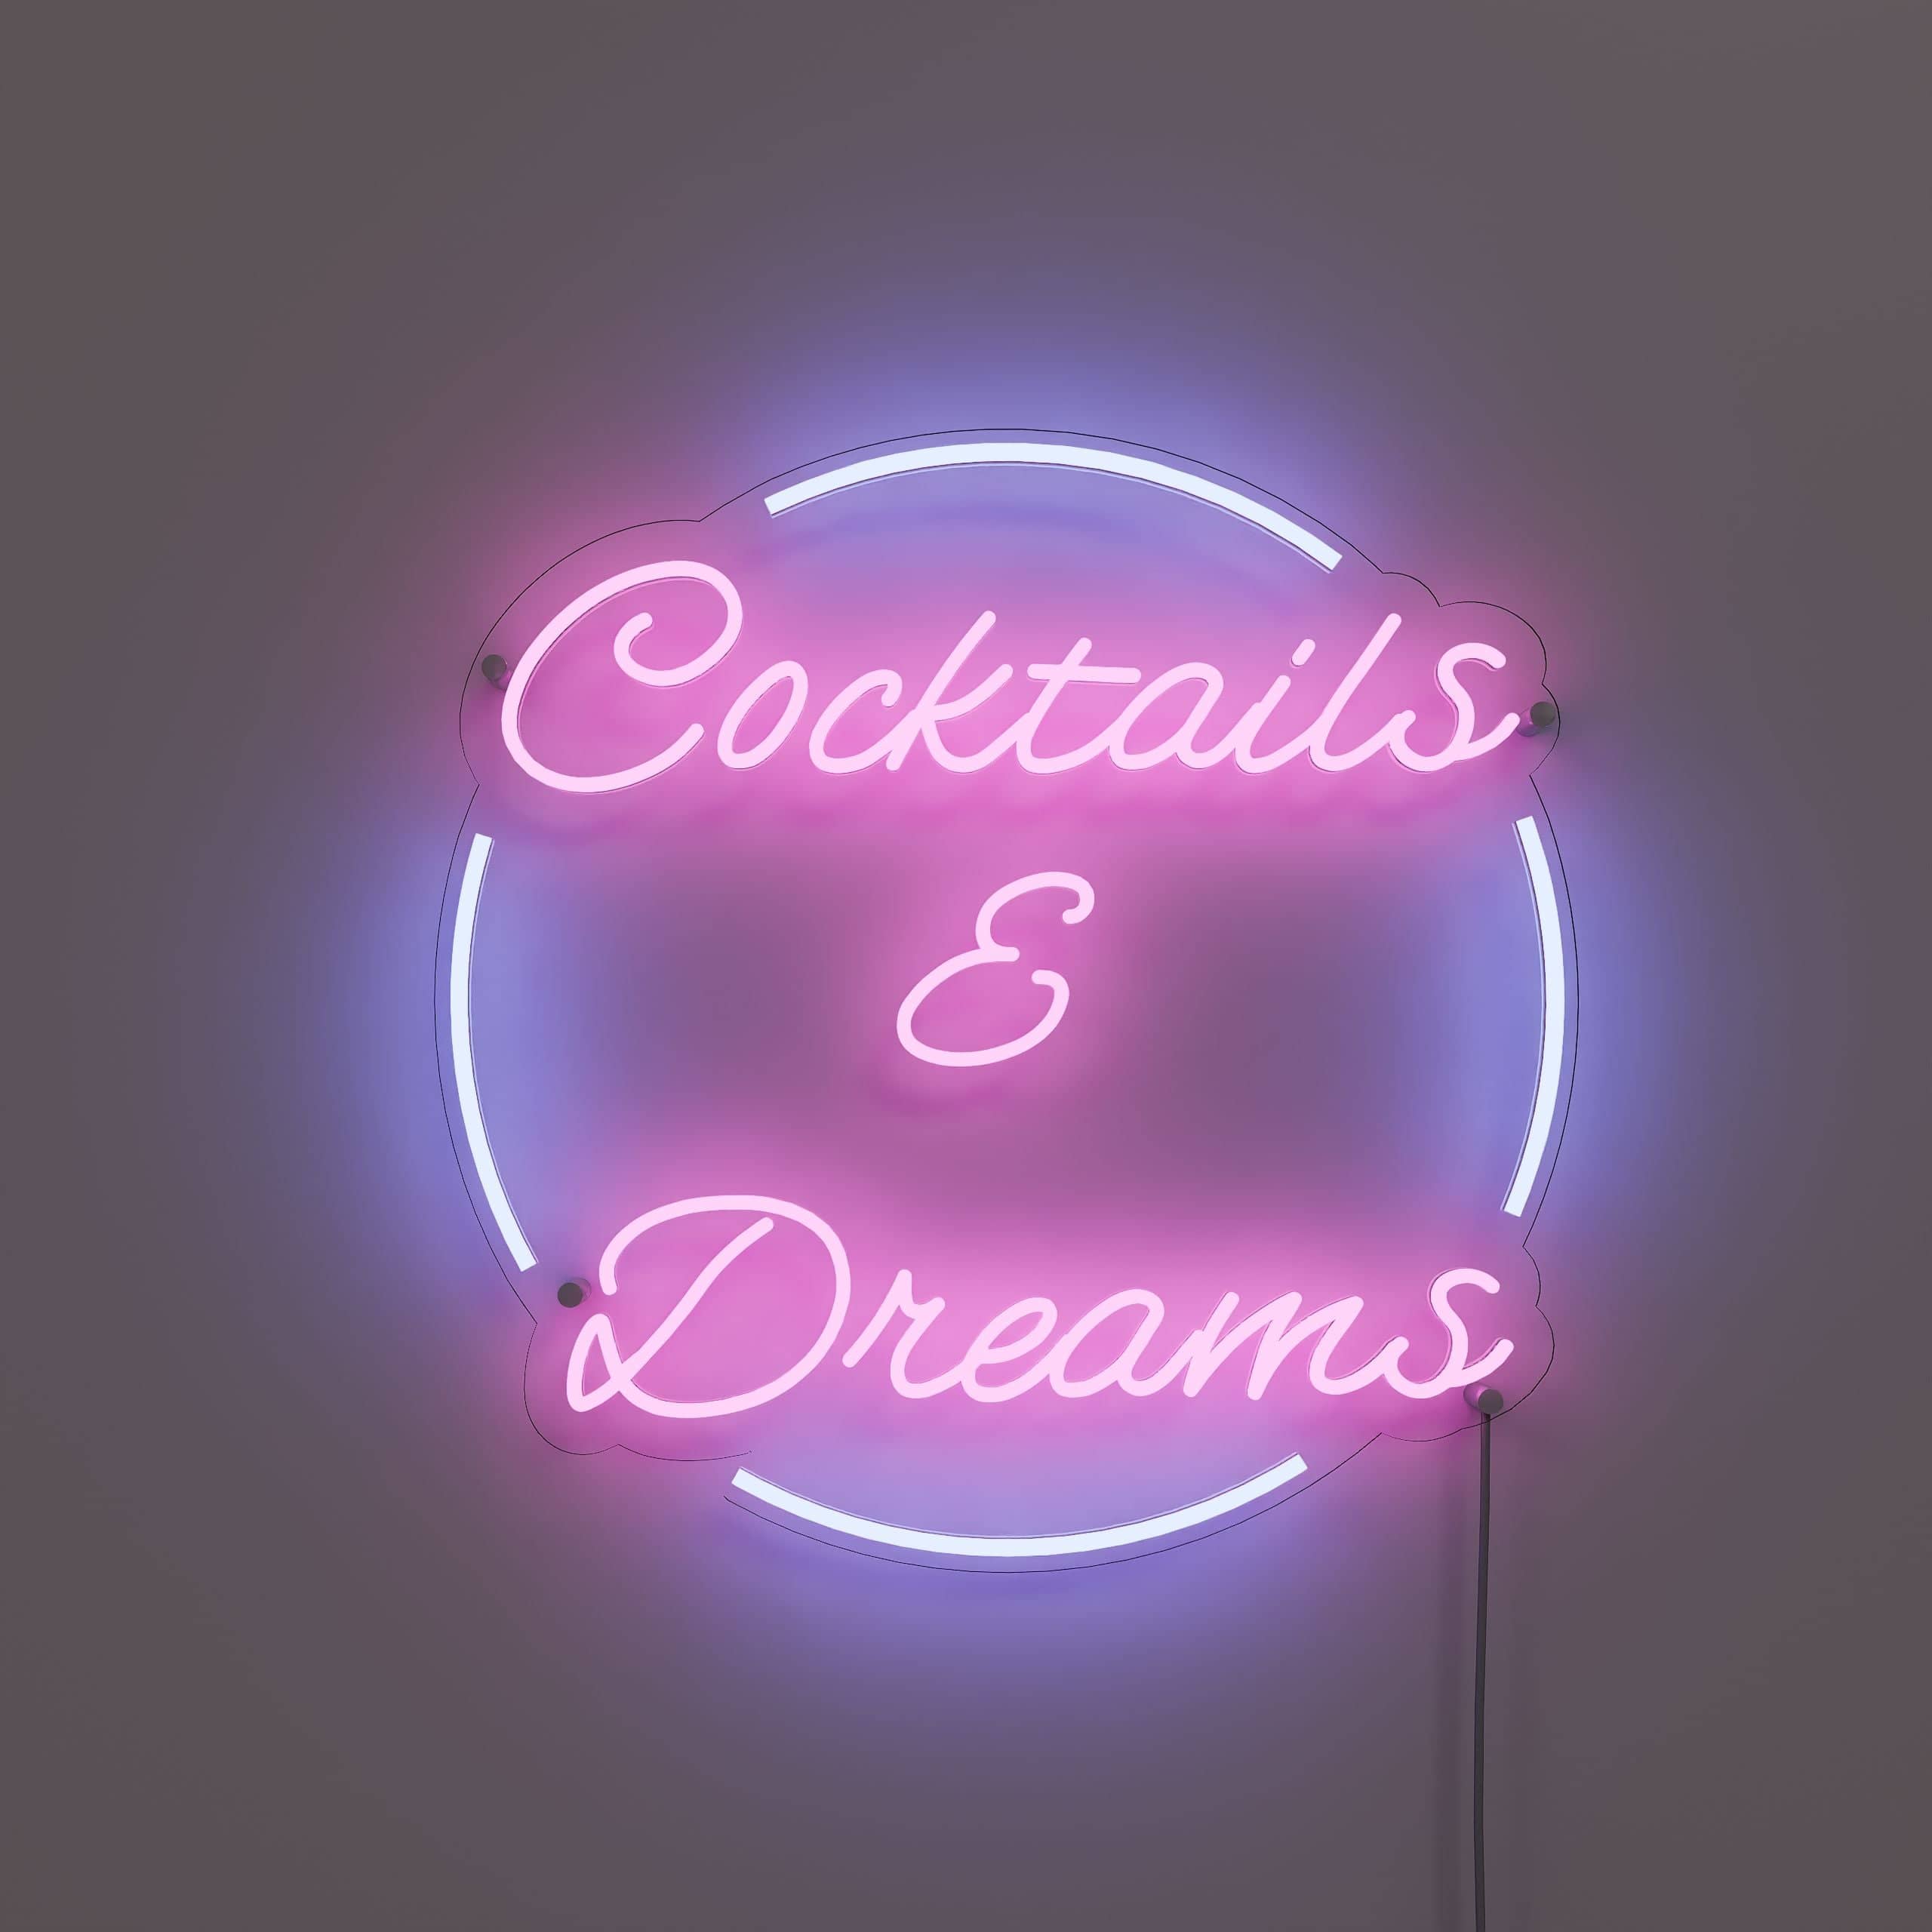 blending-dreams-with-crafted-beverages-neon-sign-lite